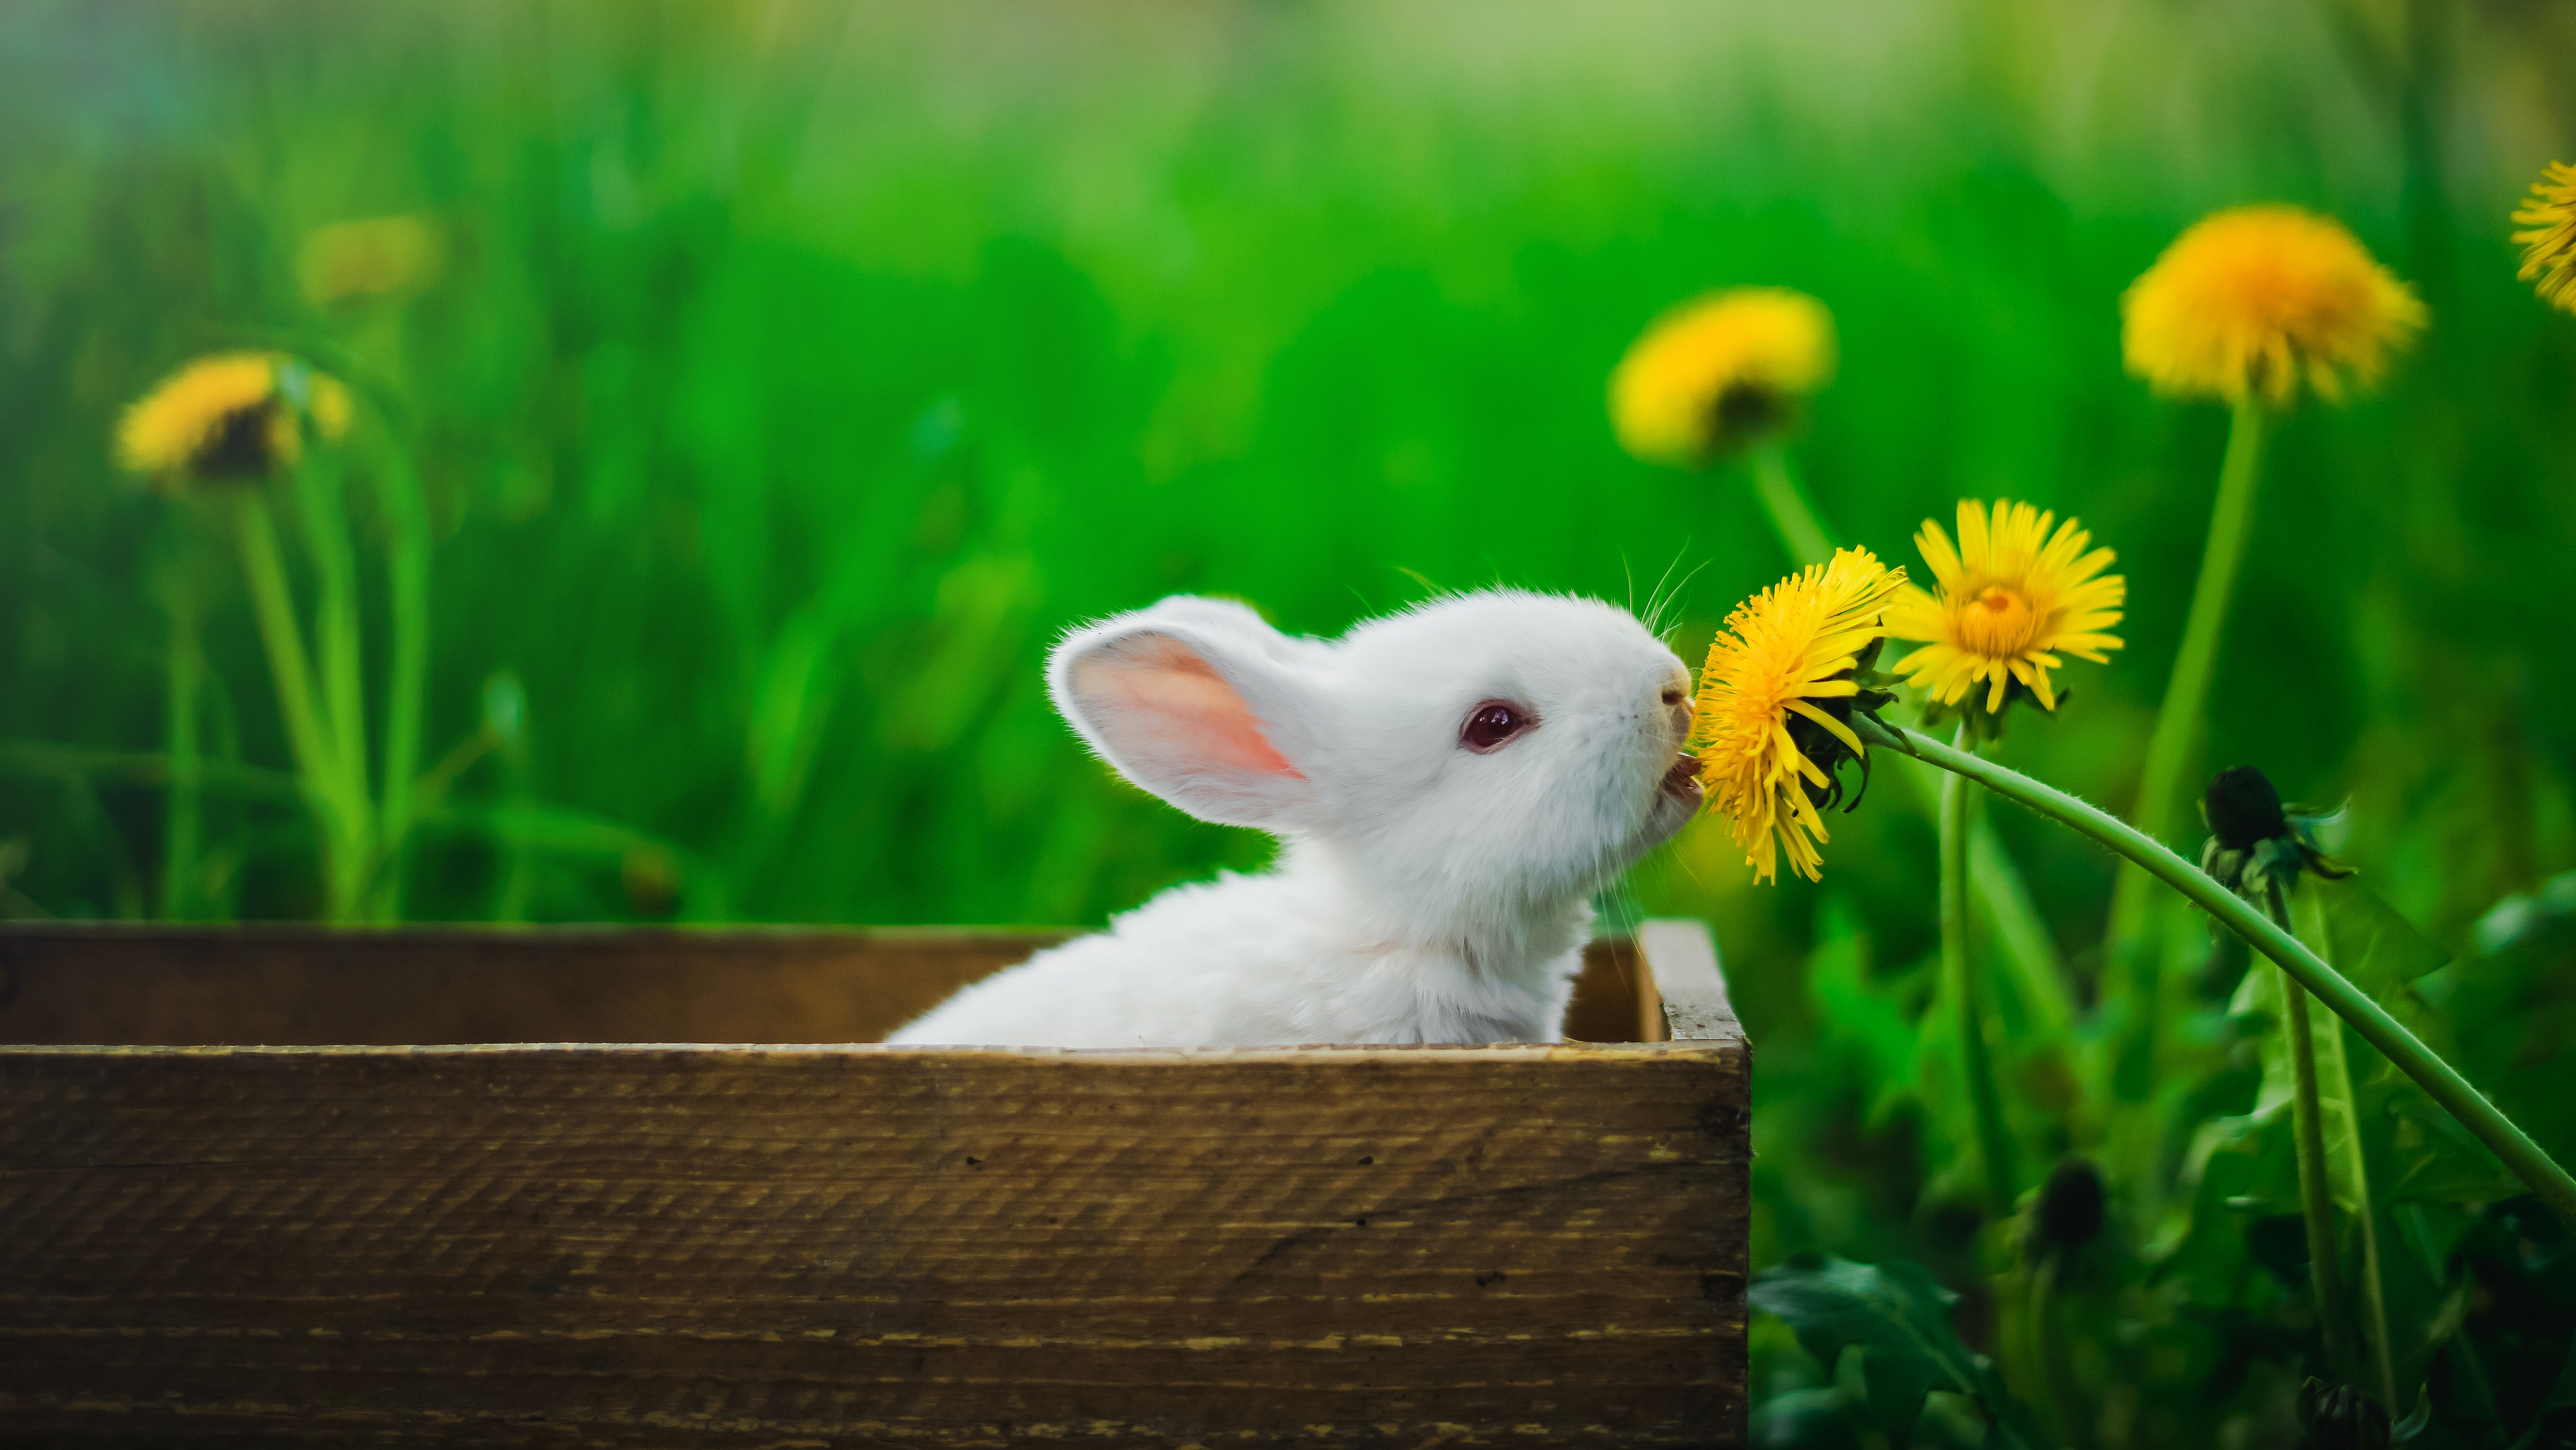 White rabbit in brown wooden box sniffing a yellow flower.